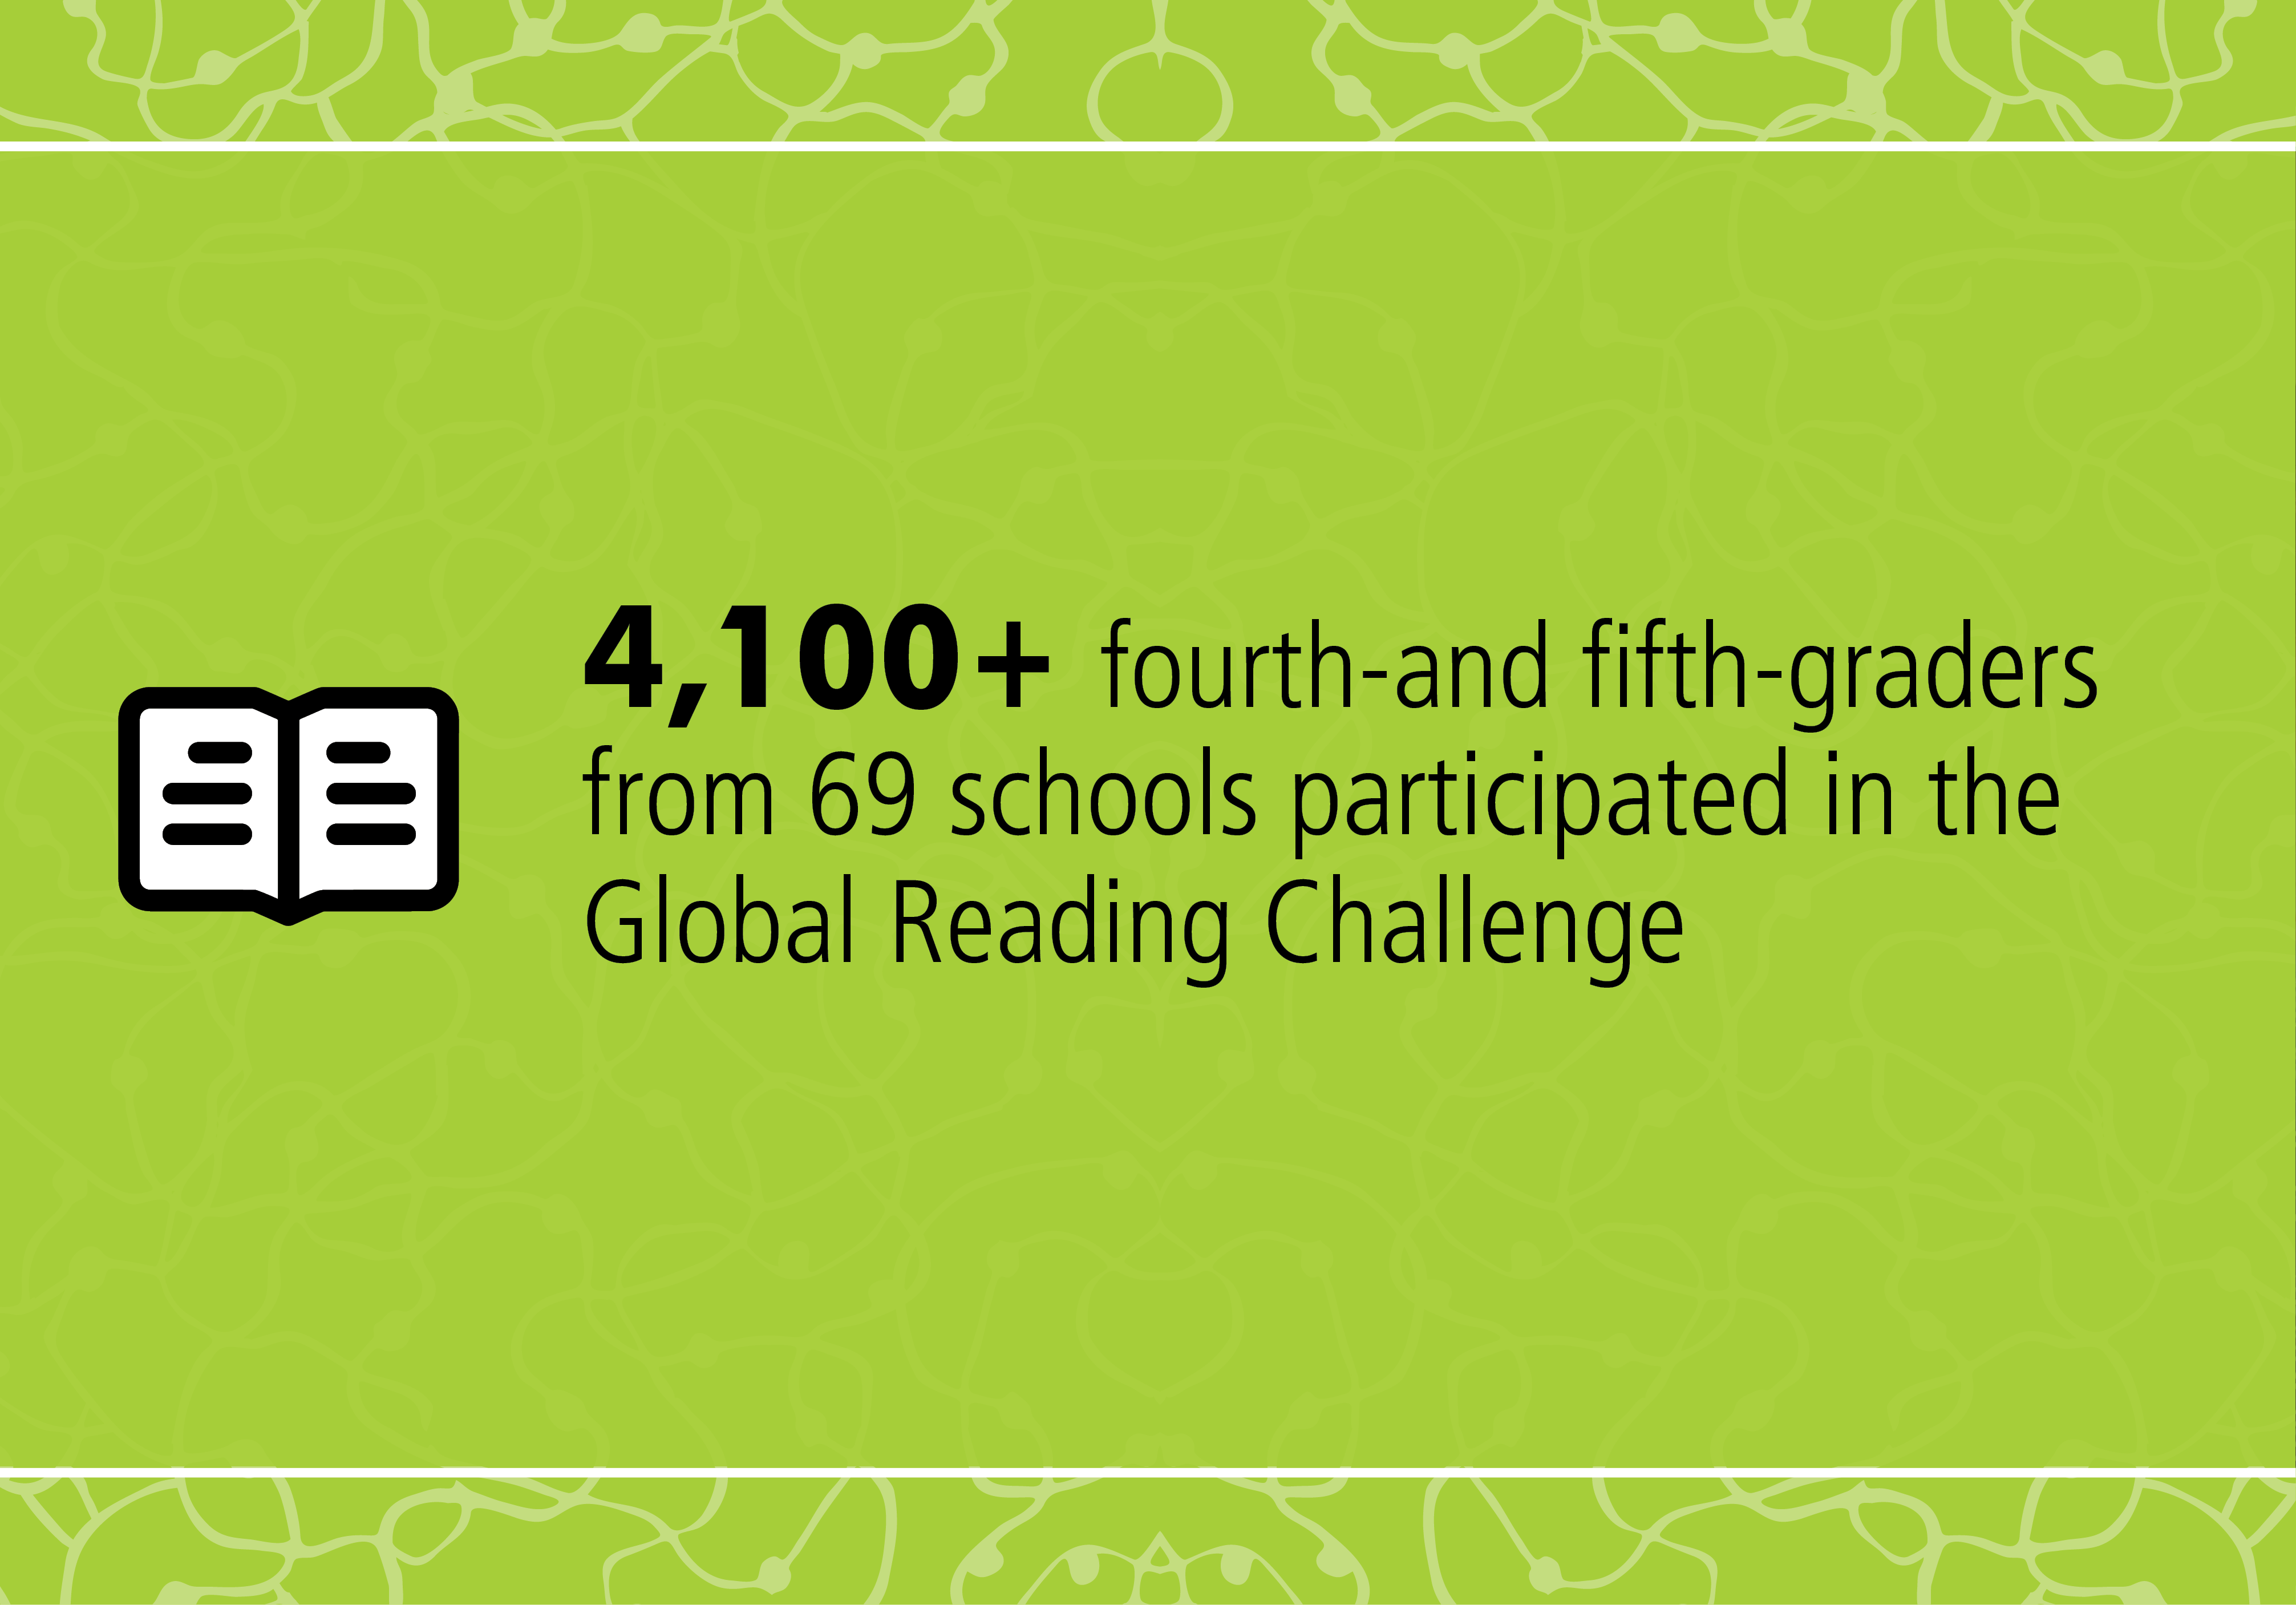 Over 4,100 fourth-and fifth-graders from 69 schools participated in the Global Reading Challenge